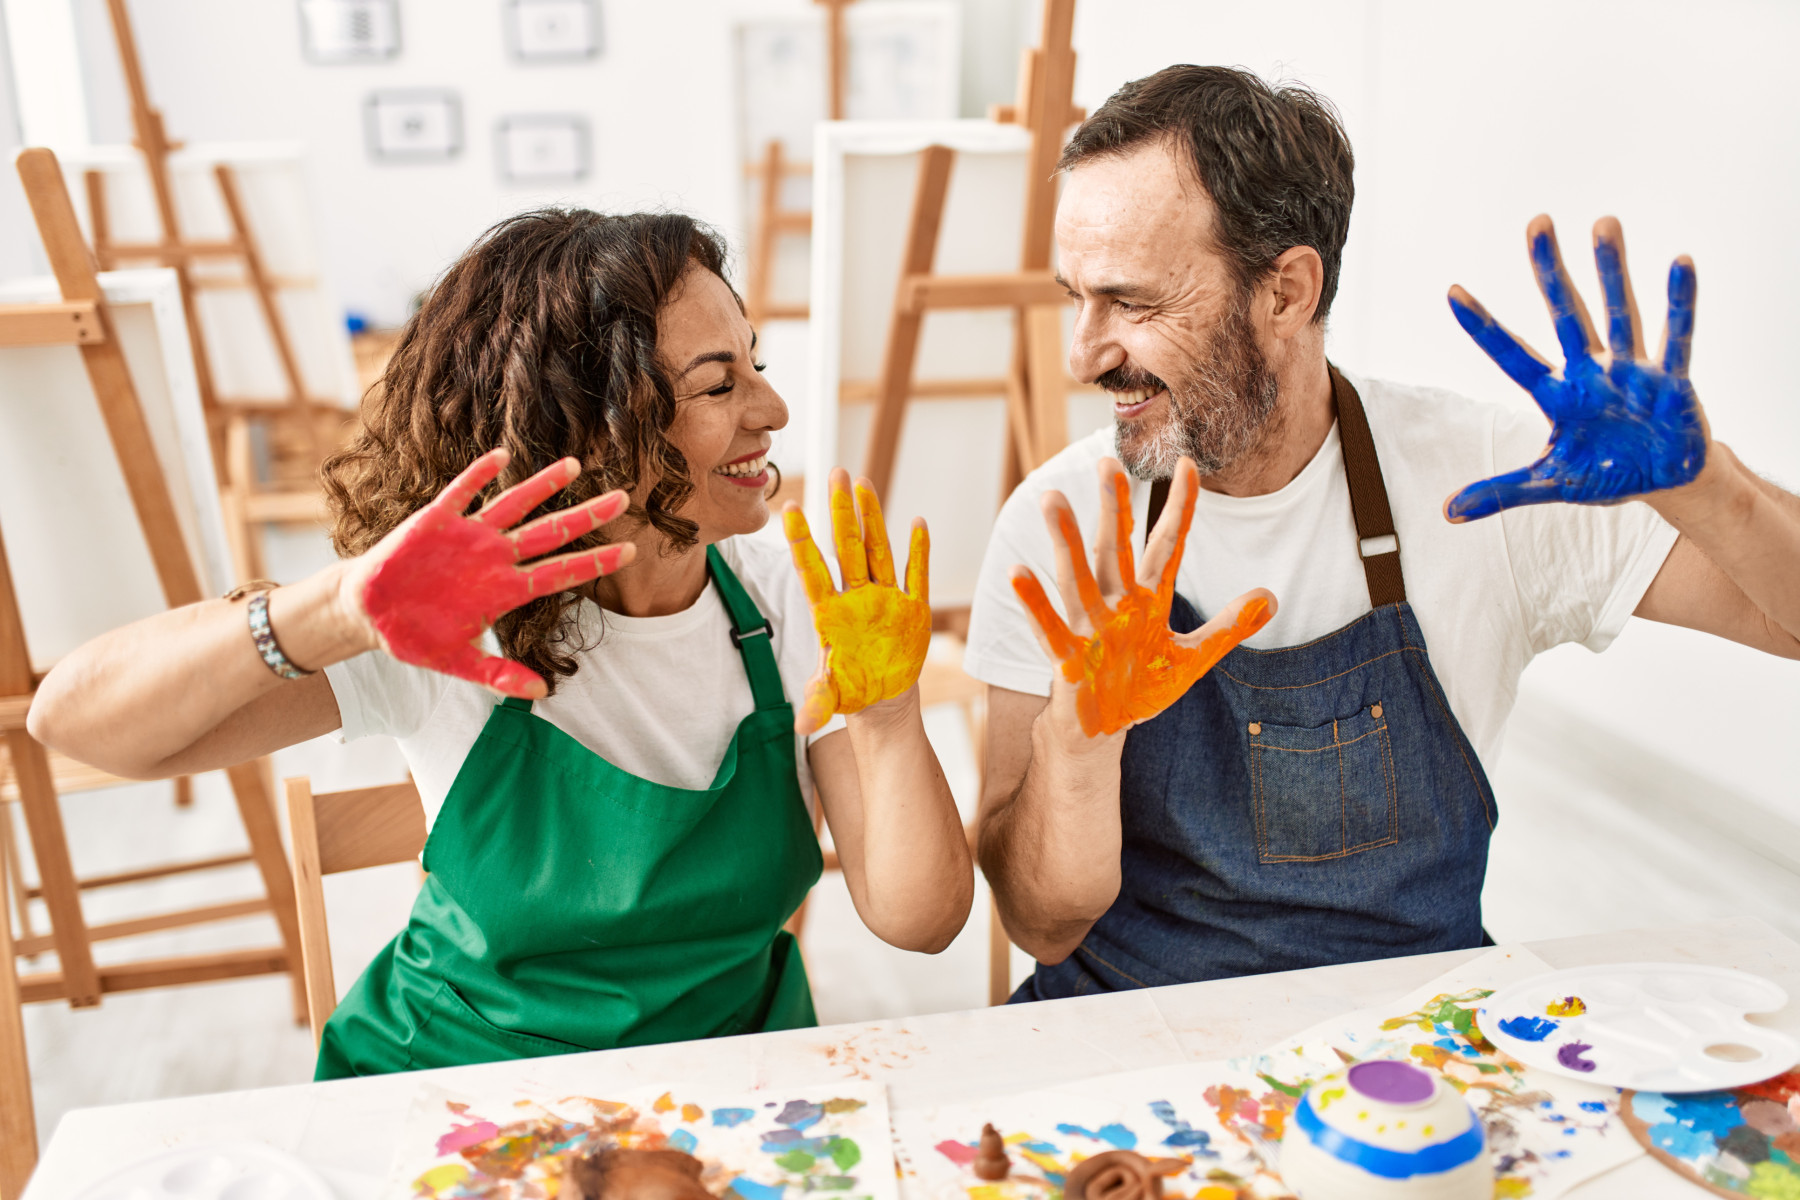 Two adults joyfully showing their paint-covered hands in an disability day programs art therapy class.